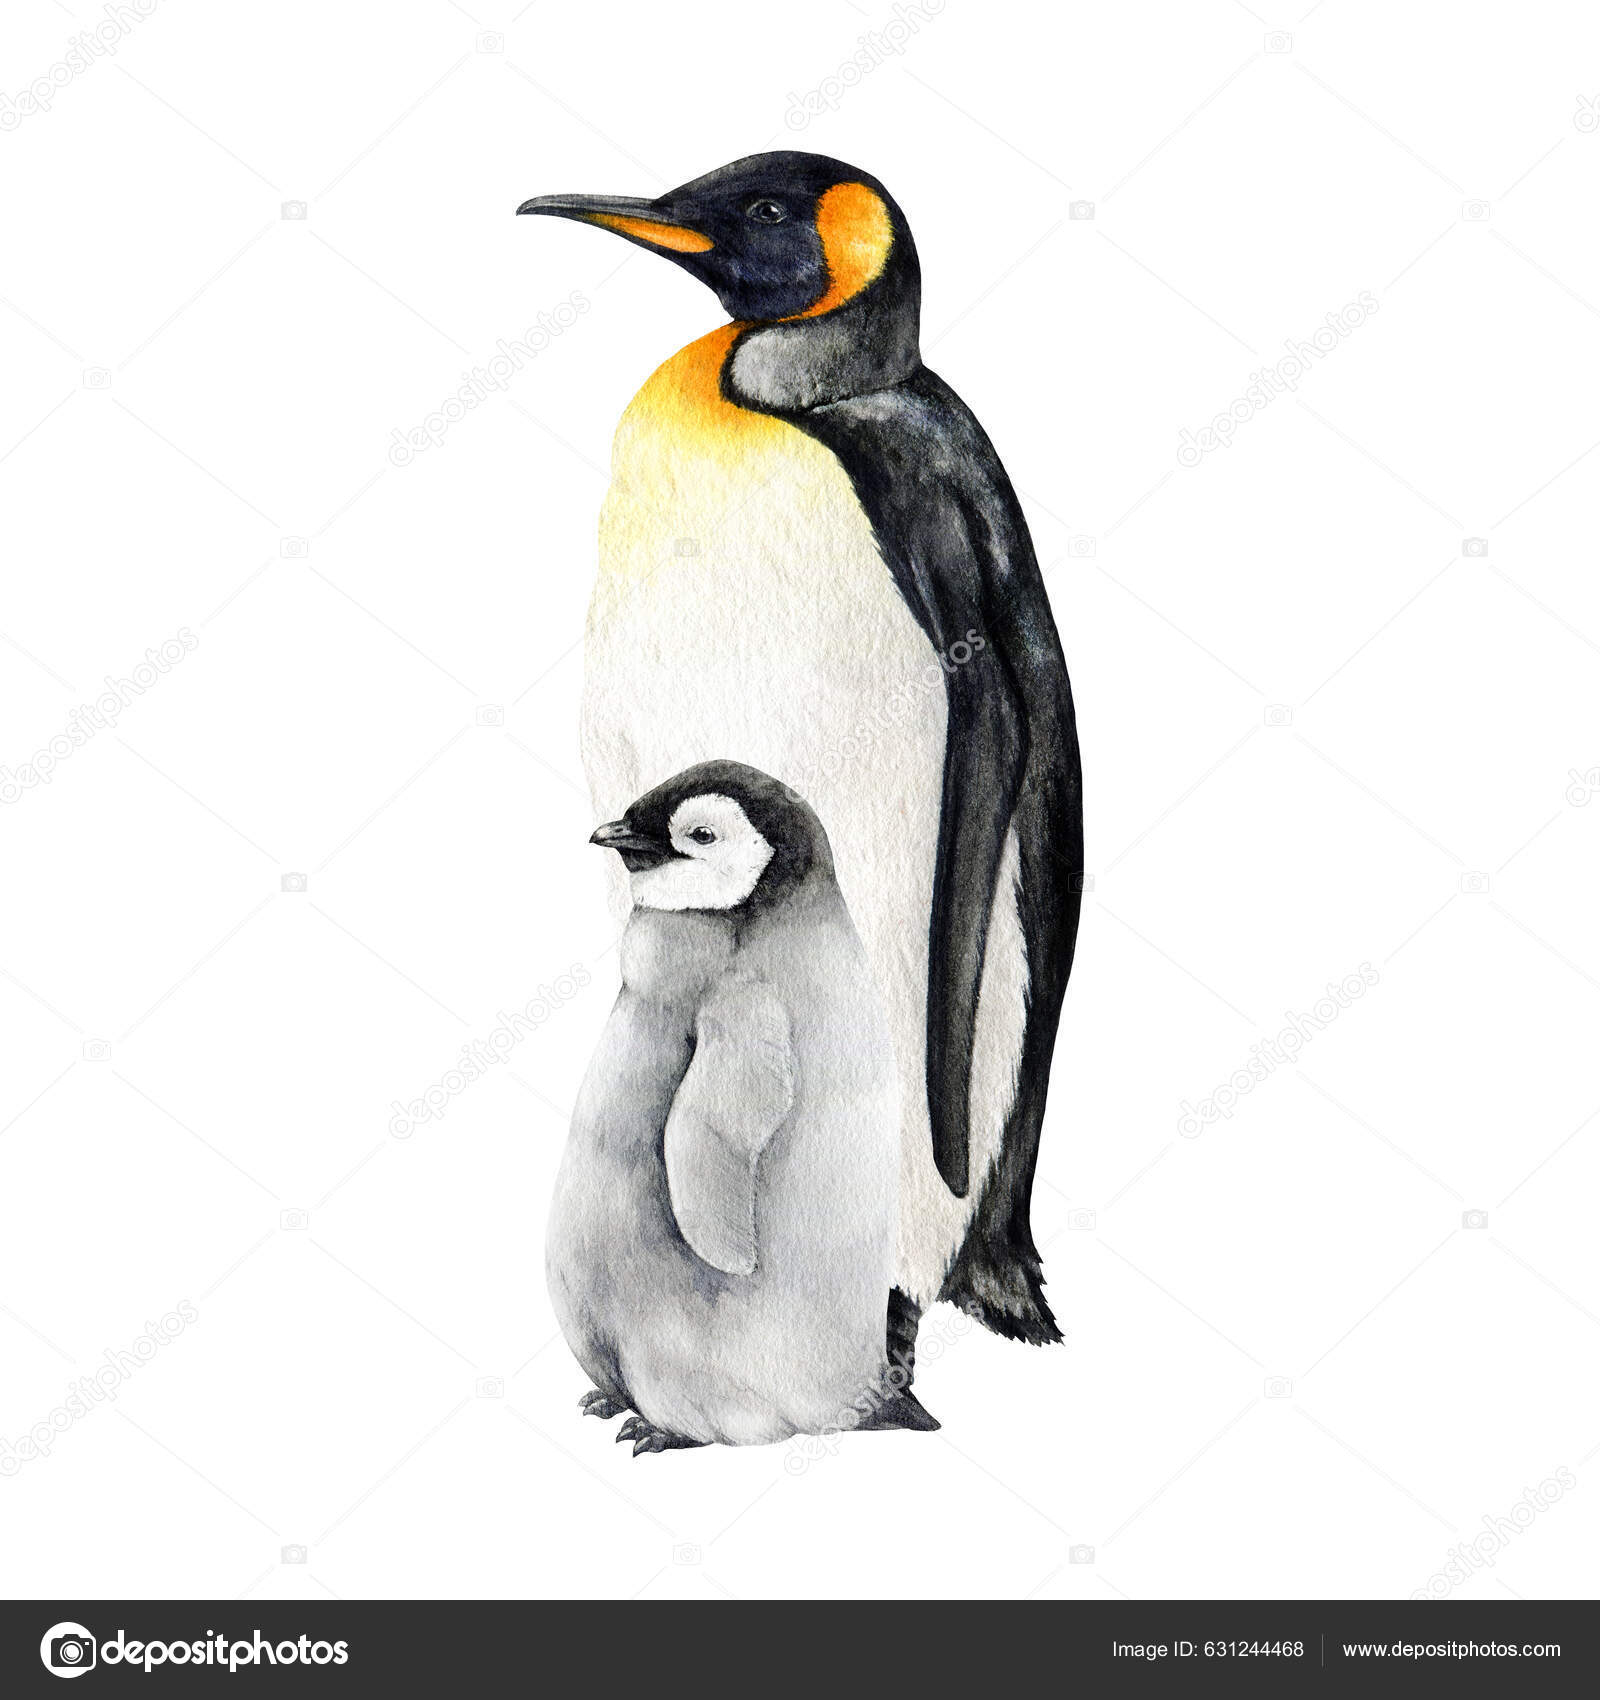 How to Draw a Penguin: Cartoon and Realistic Guides | Skip To My Lou